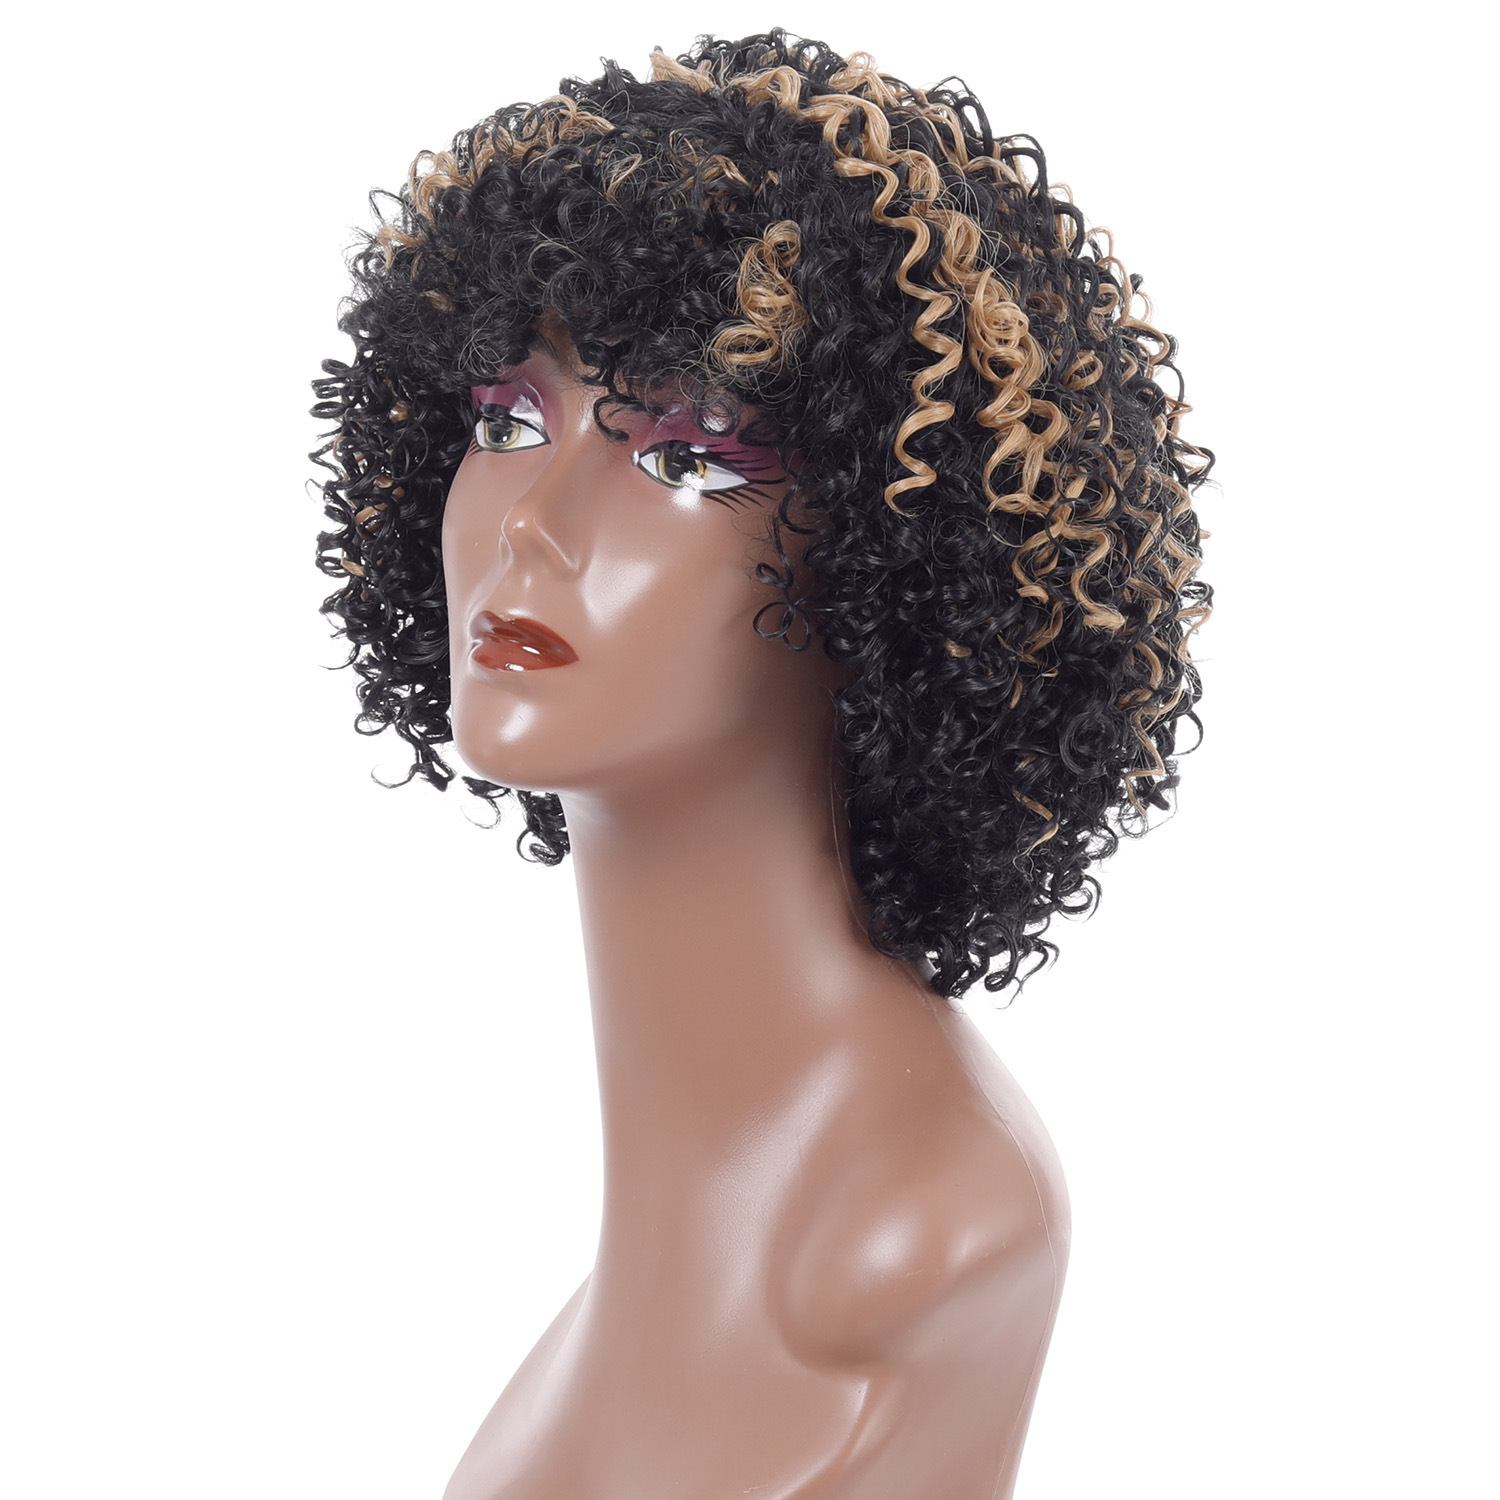 Synthetic wig with short curly hair in black highlight blonde color, includes women's afro small curly wig headgear